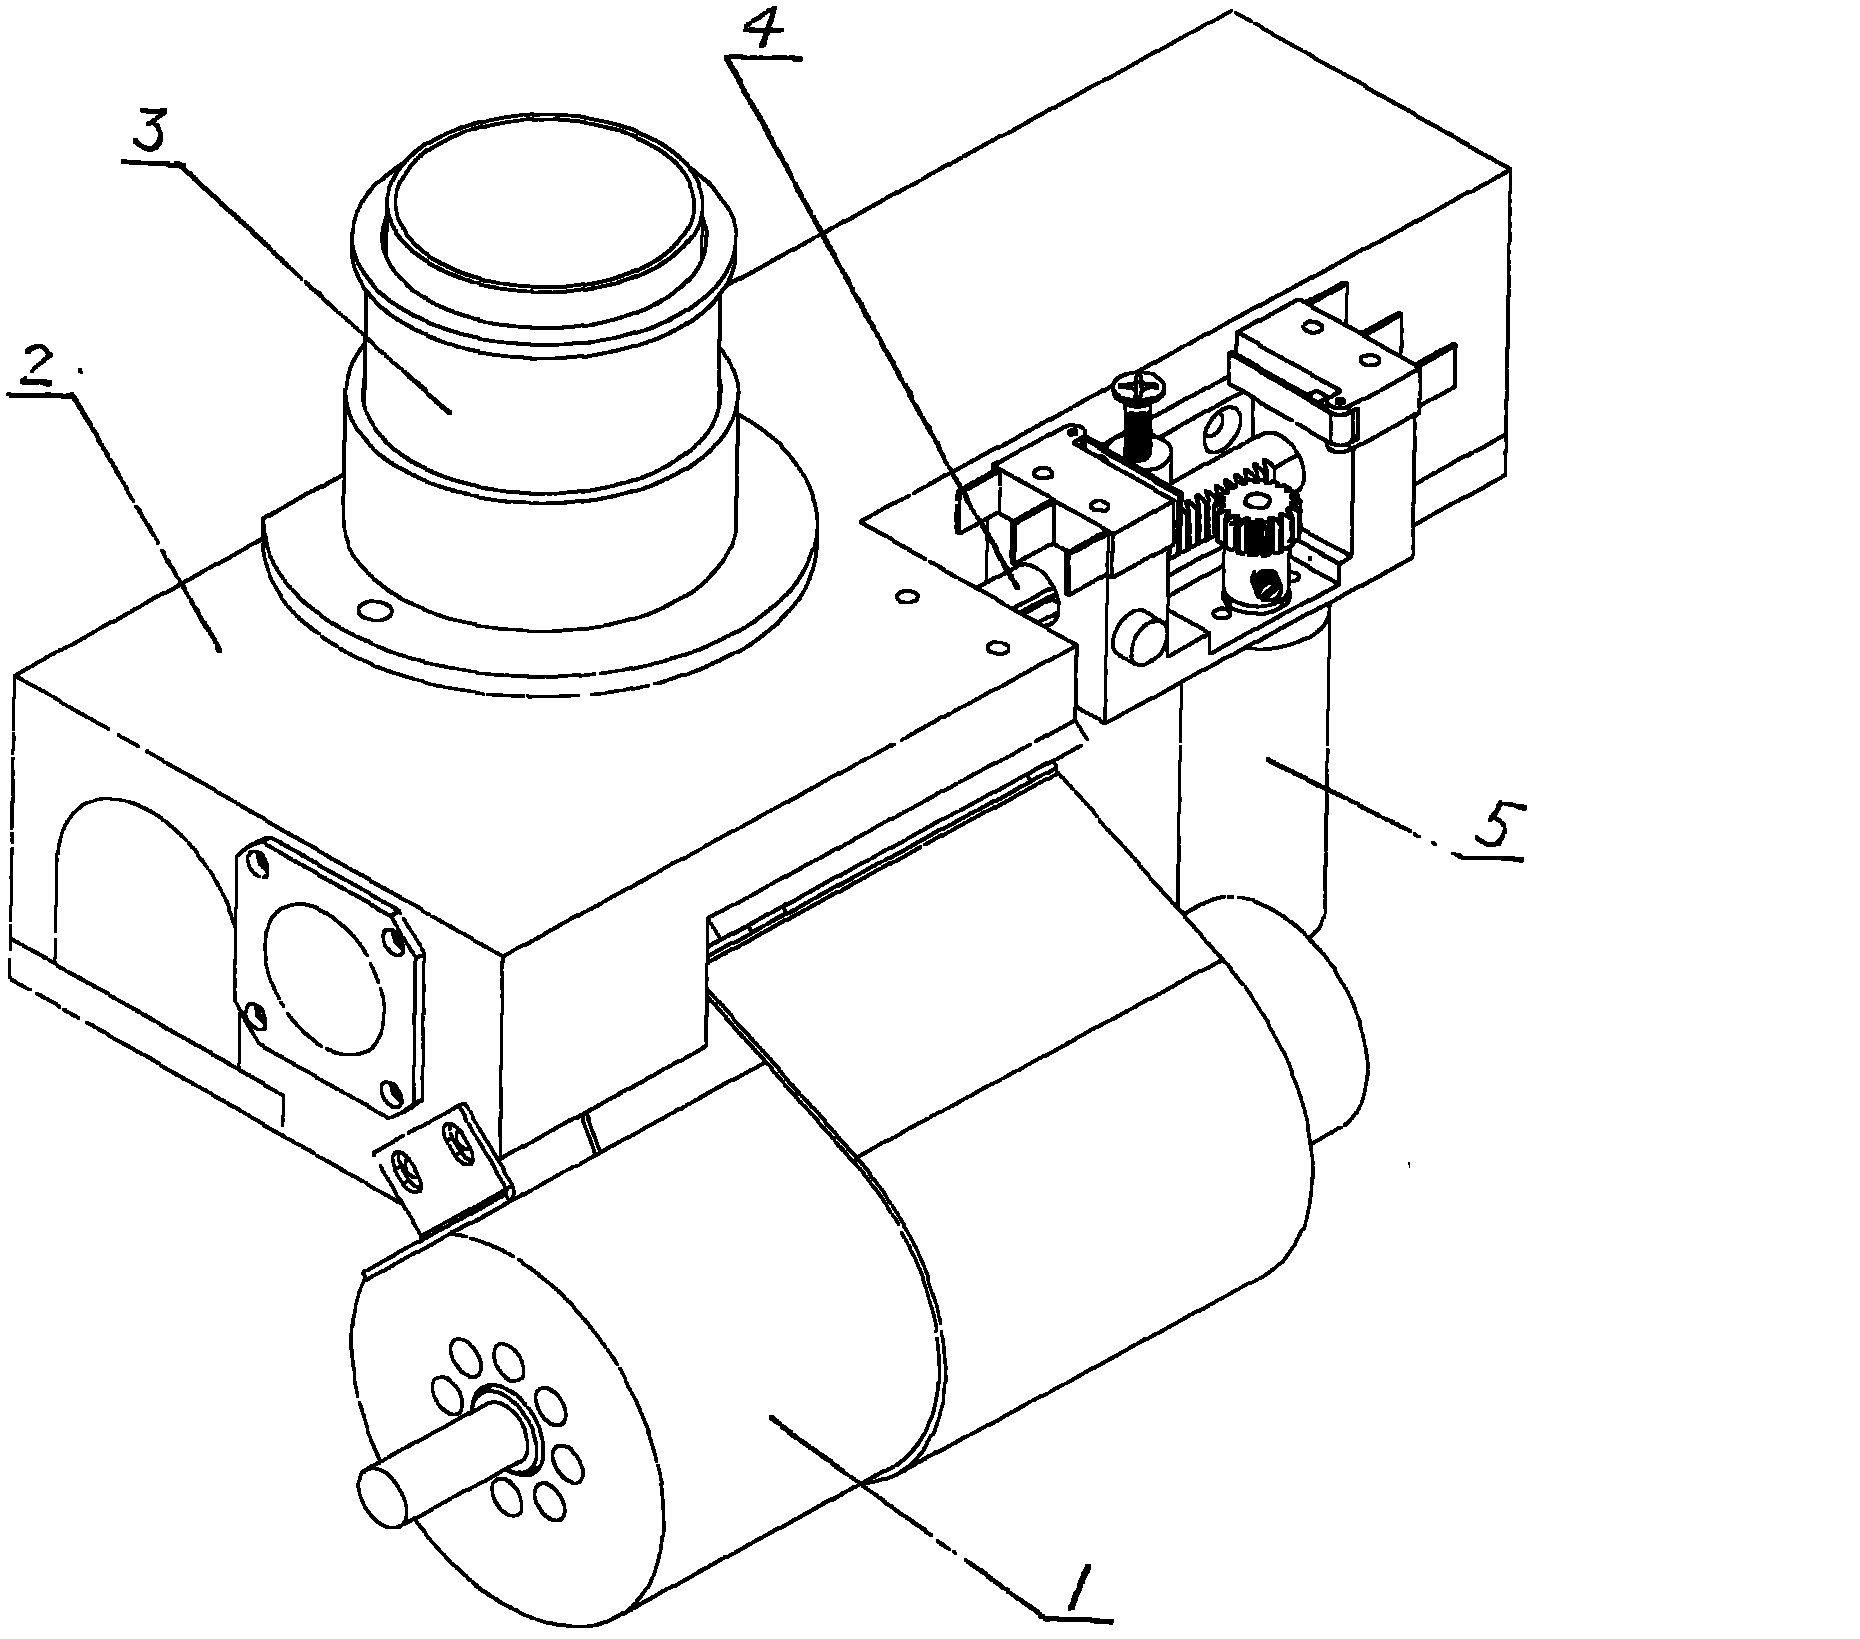 Photoelectric conversion device for detecting sulfur